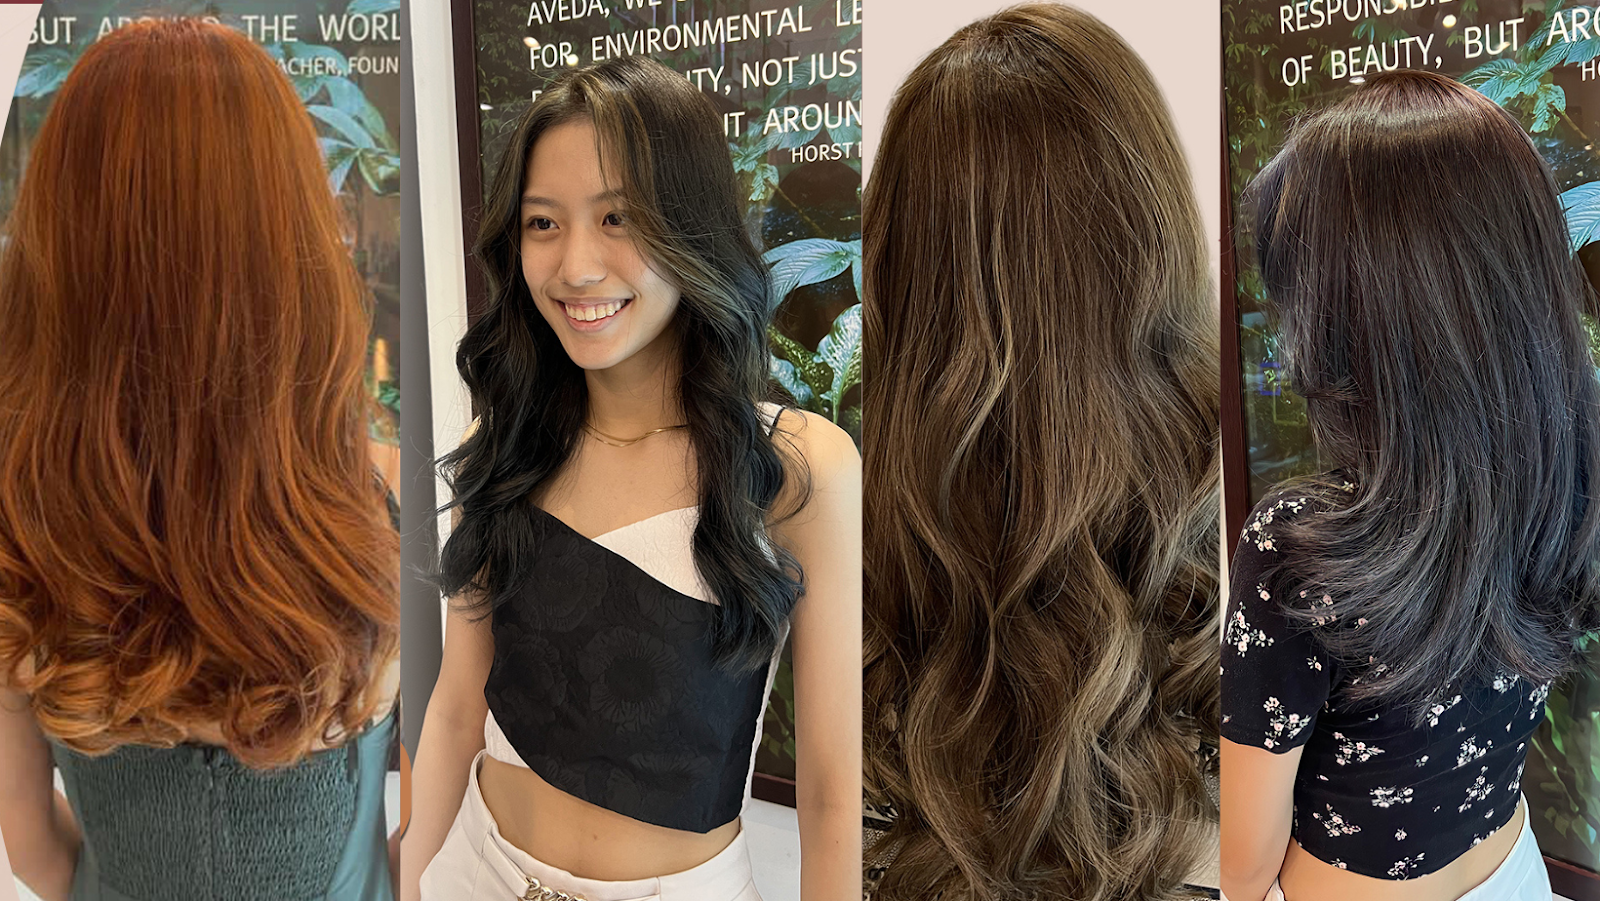 Transform Your Look with Digital Perm Hair at Kelture Aveda 2